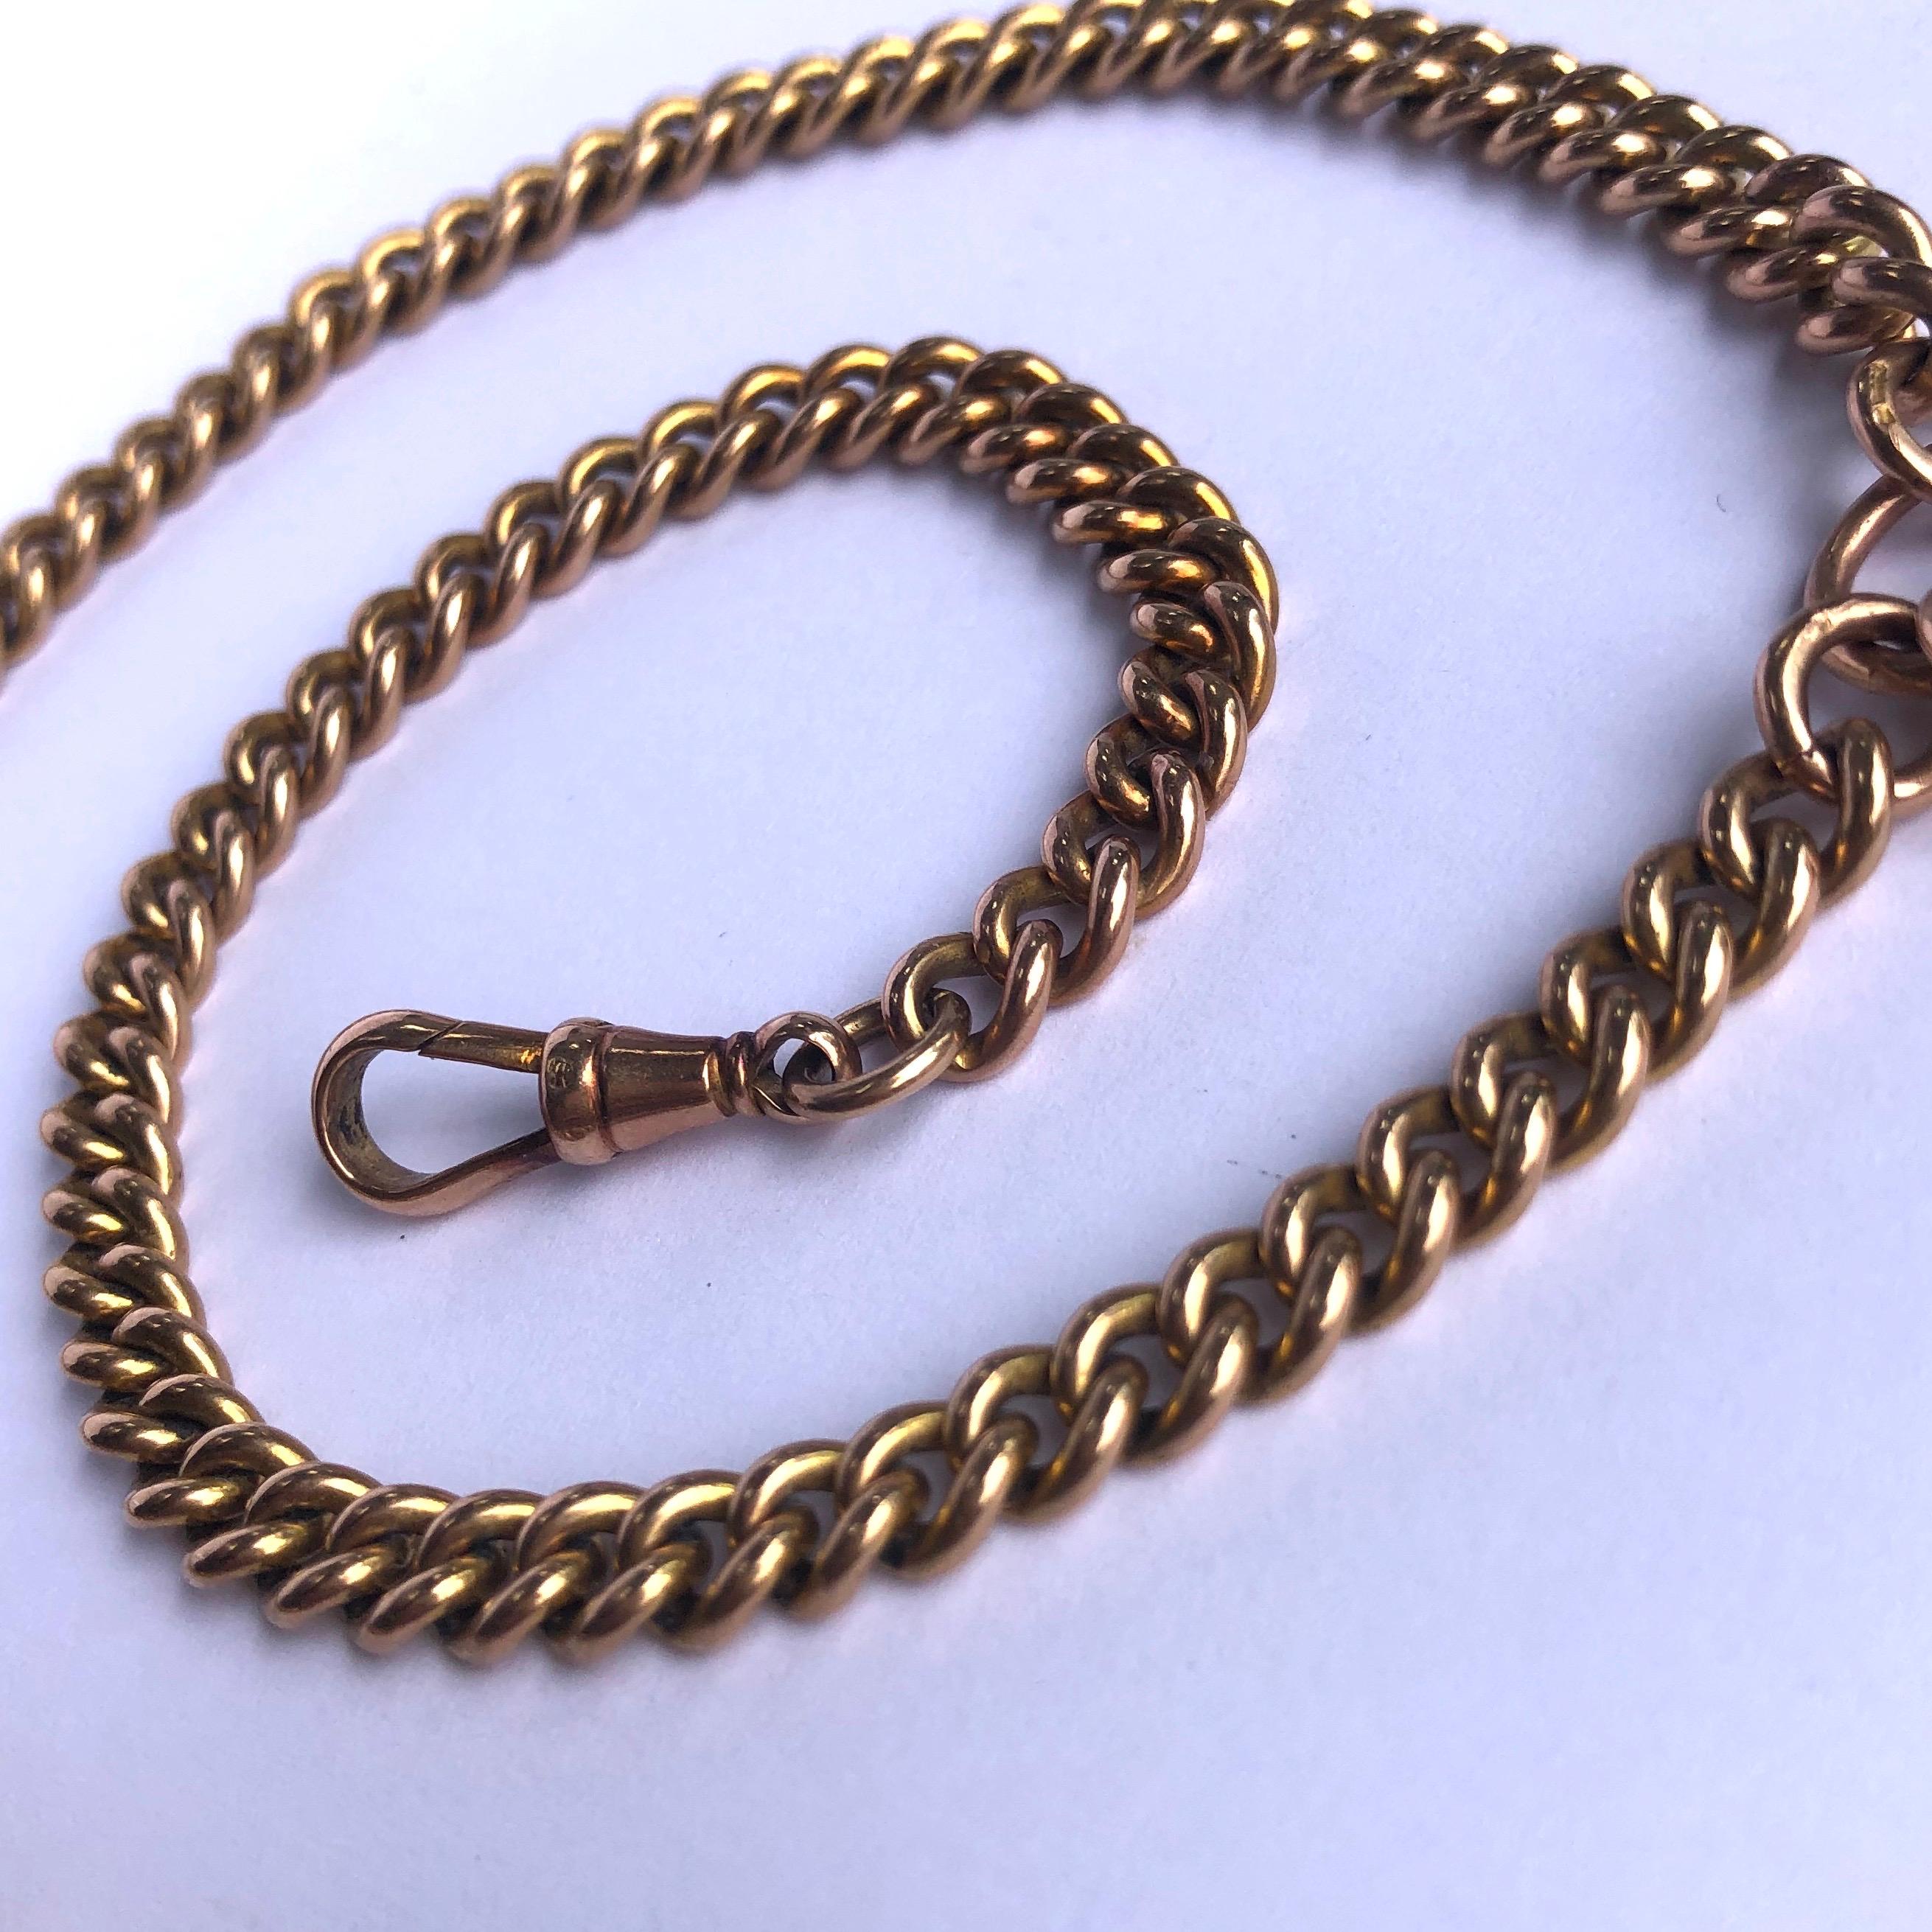 This albertina is the perfect item for a gents wardrobe or could even be used as a necklace. The chain has a dog clip either end and at the centre there is a t-chain and extra loop. Each link is hallmarked, made in Birmingham, England.

Length: 43cm